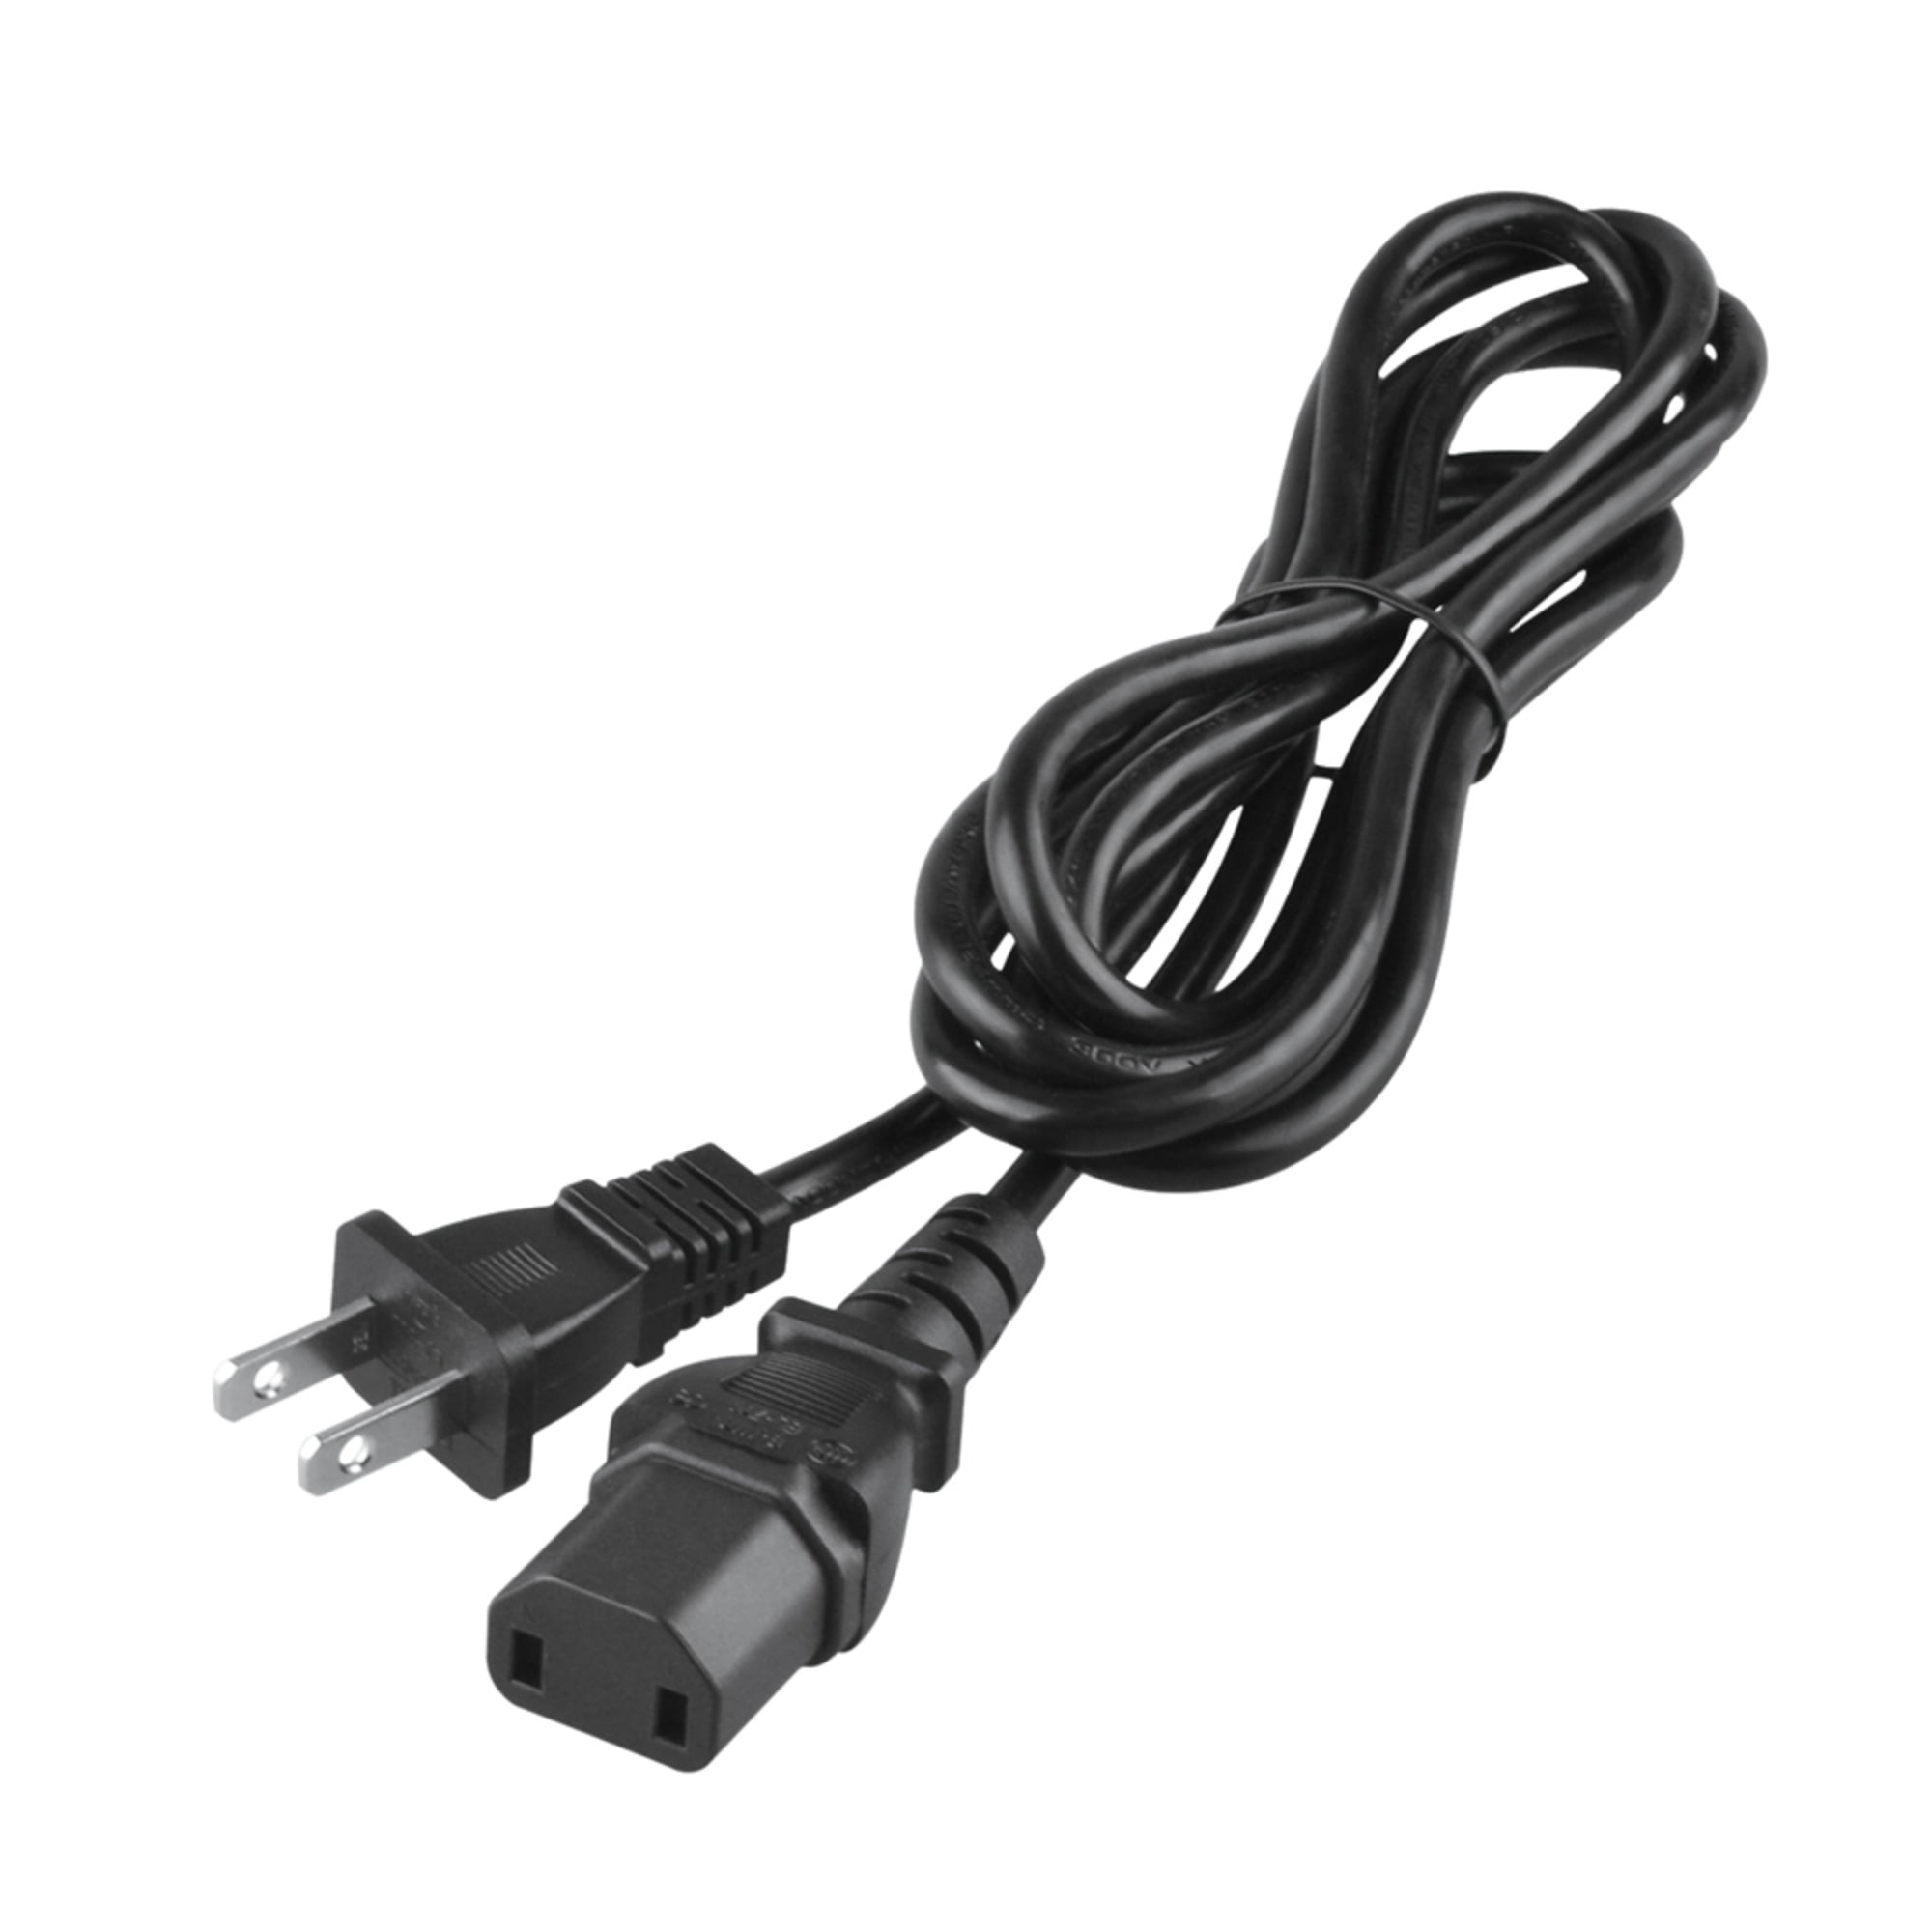 Black Decker Pav1200w AC Adapter Charger Power Supply Cord Wire